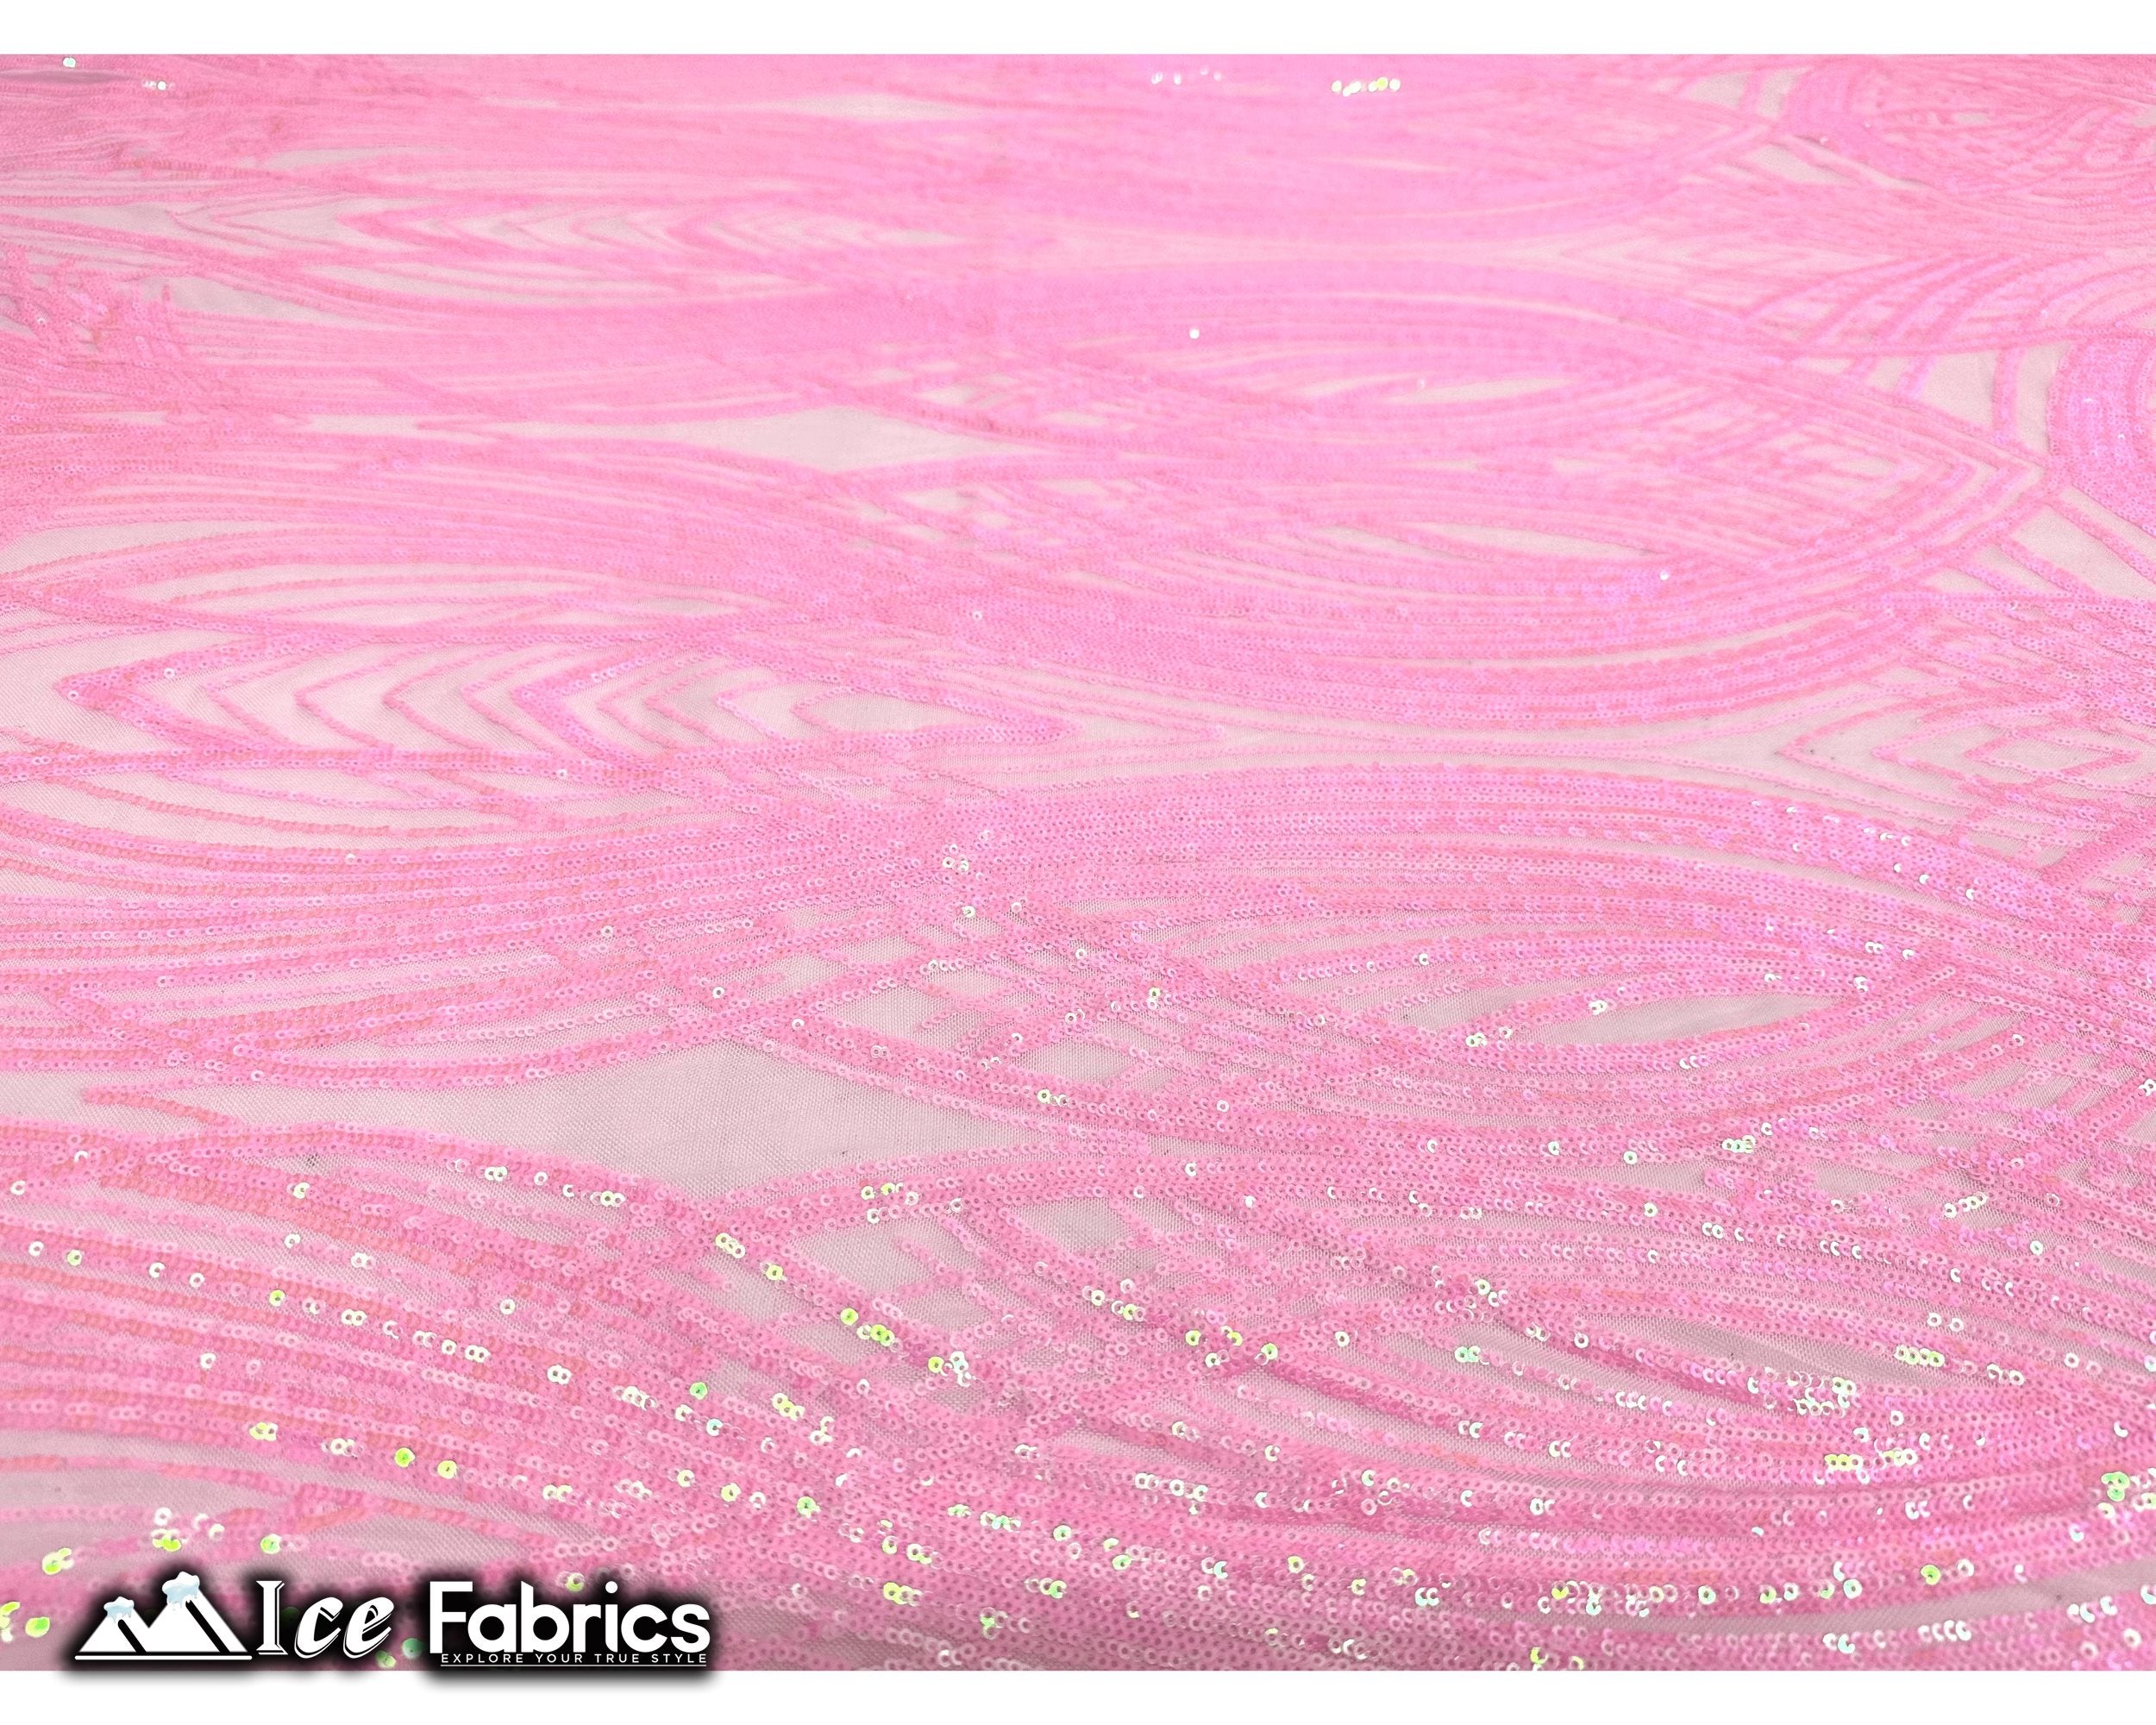 Peacock Sequin Fabric By The Yard 4 Way Stretch Spandex ICE FABRICS Candy Pink